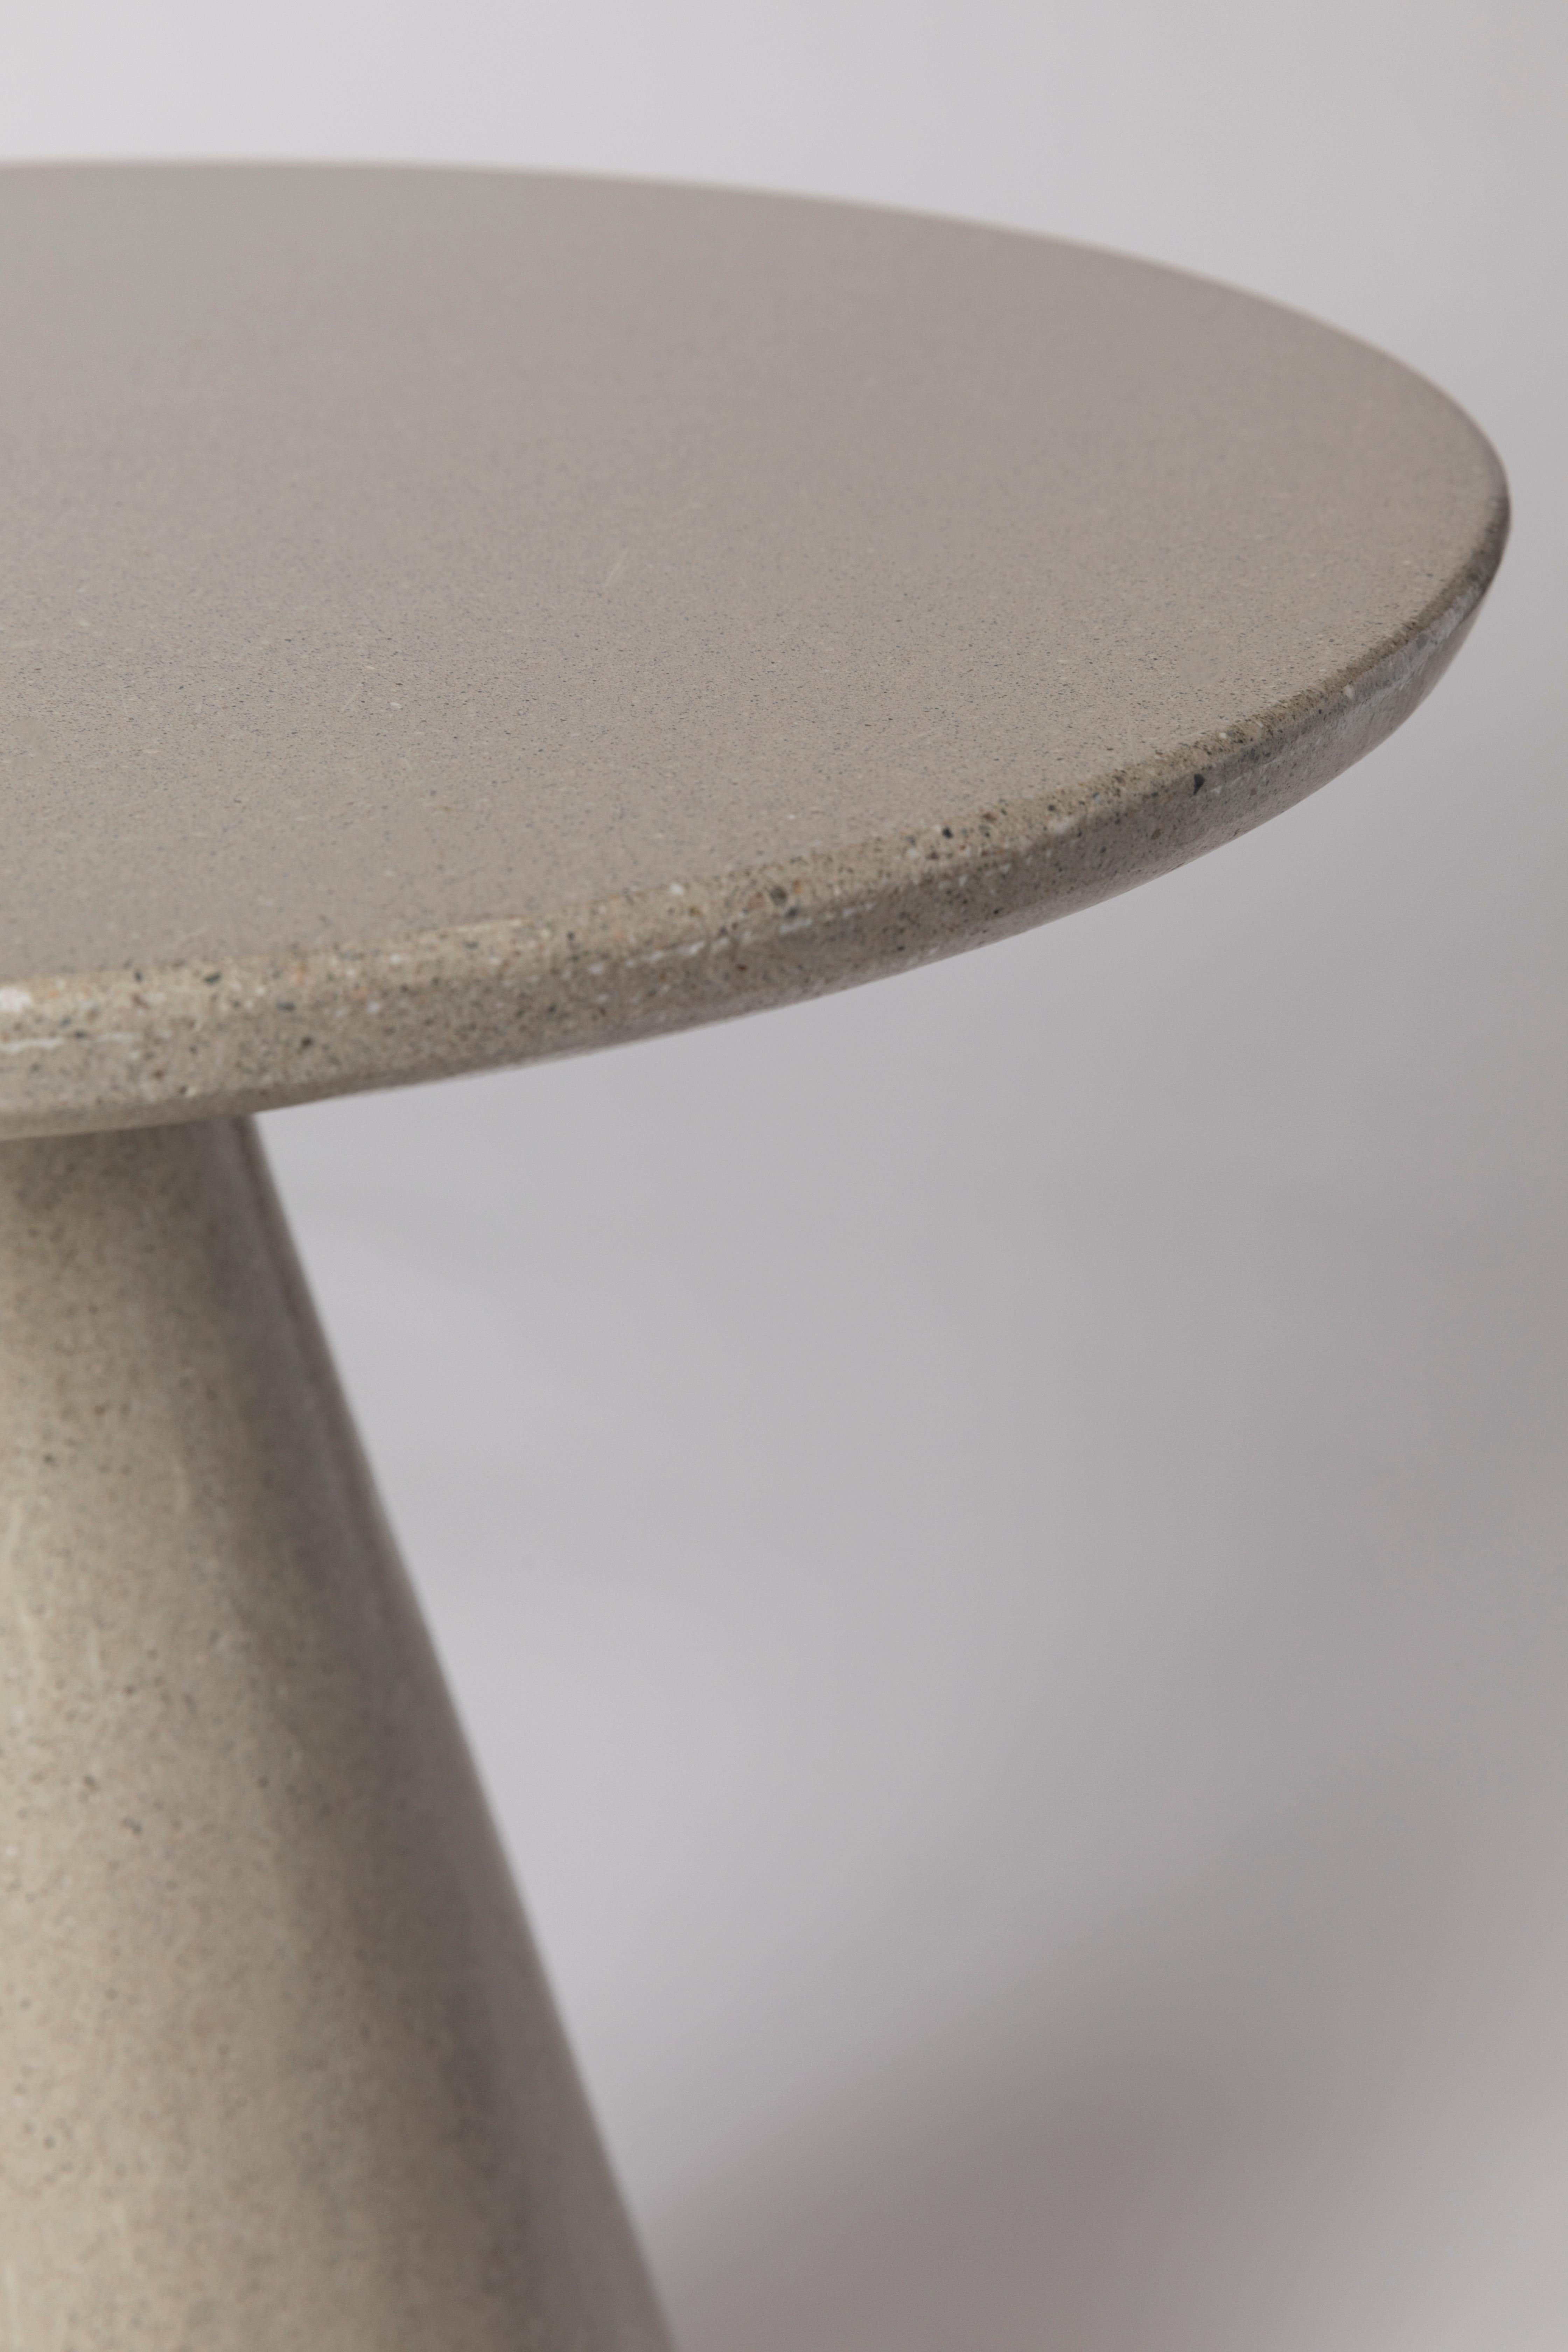 James de Wulf Concrete Round Side Table, Standard Colors In New Condition For Sale In Los Angeles, CA